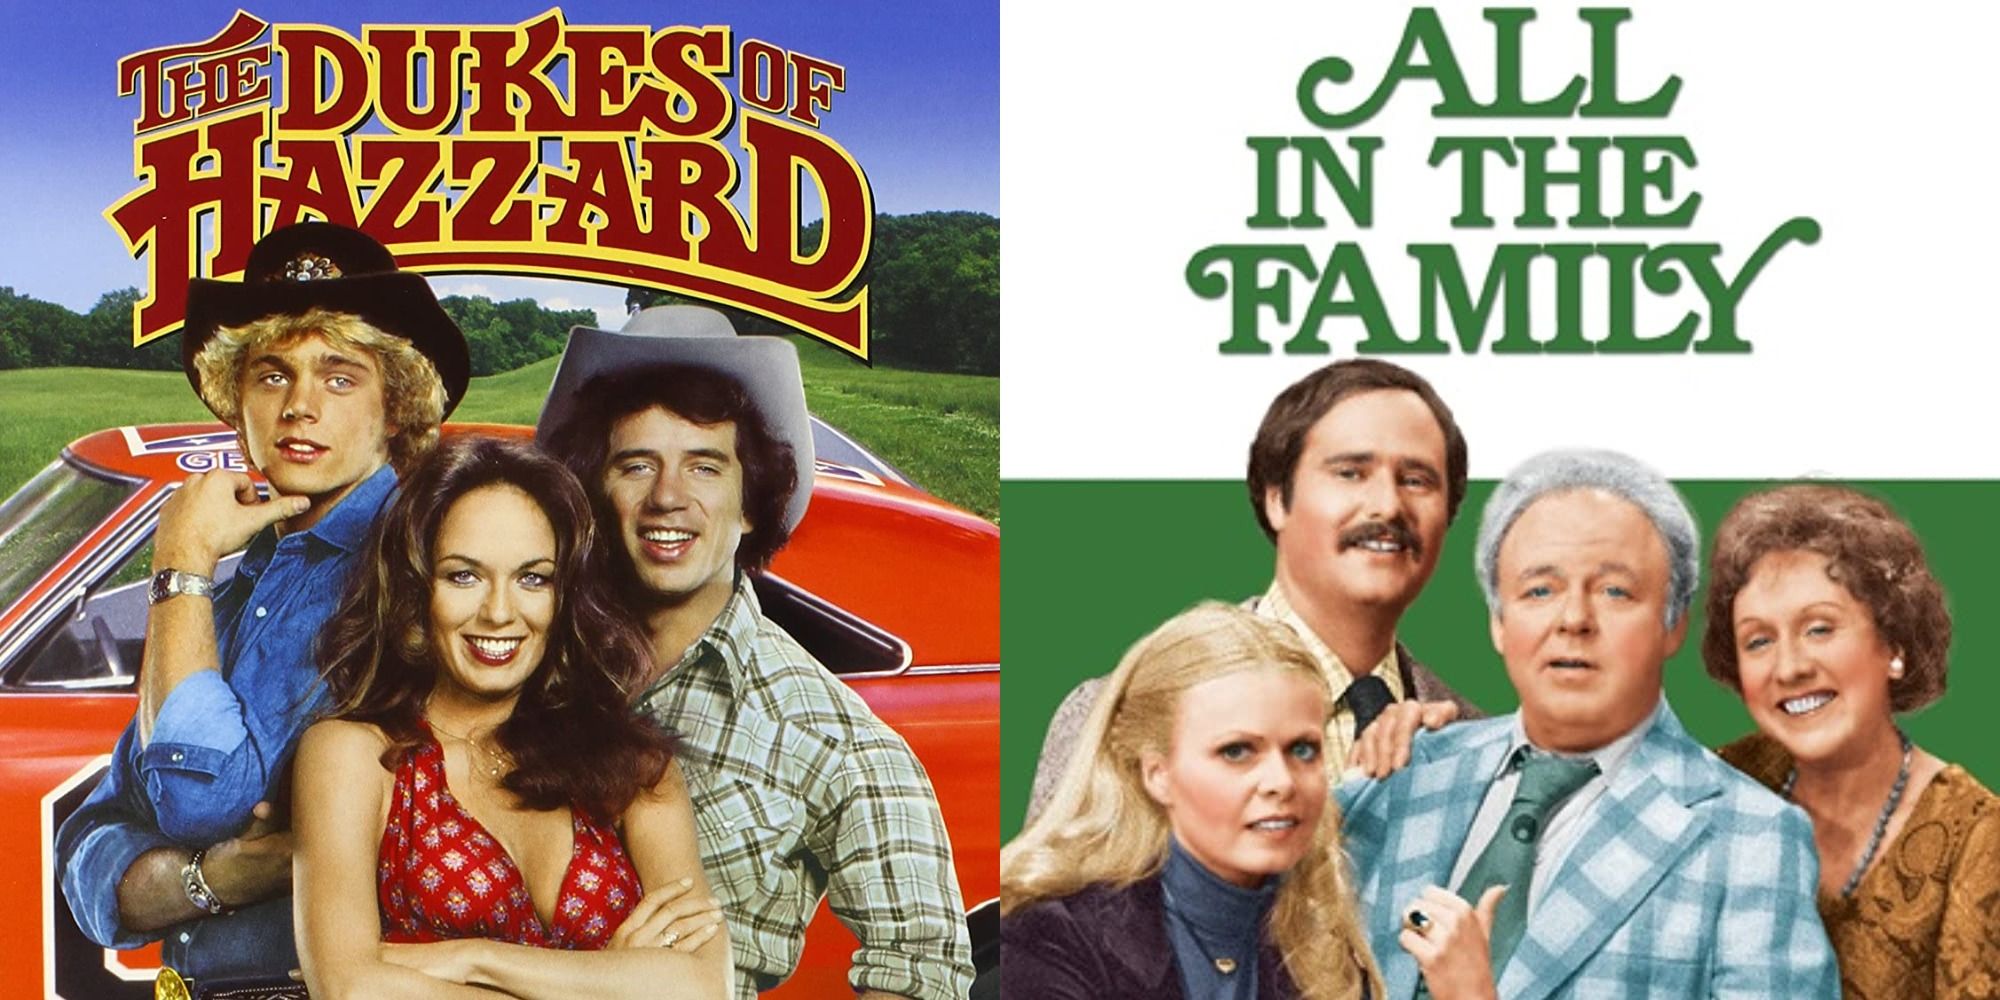 Split image showing covers for The Dukes of Hazzard and All in the Family